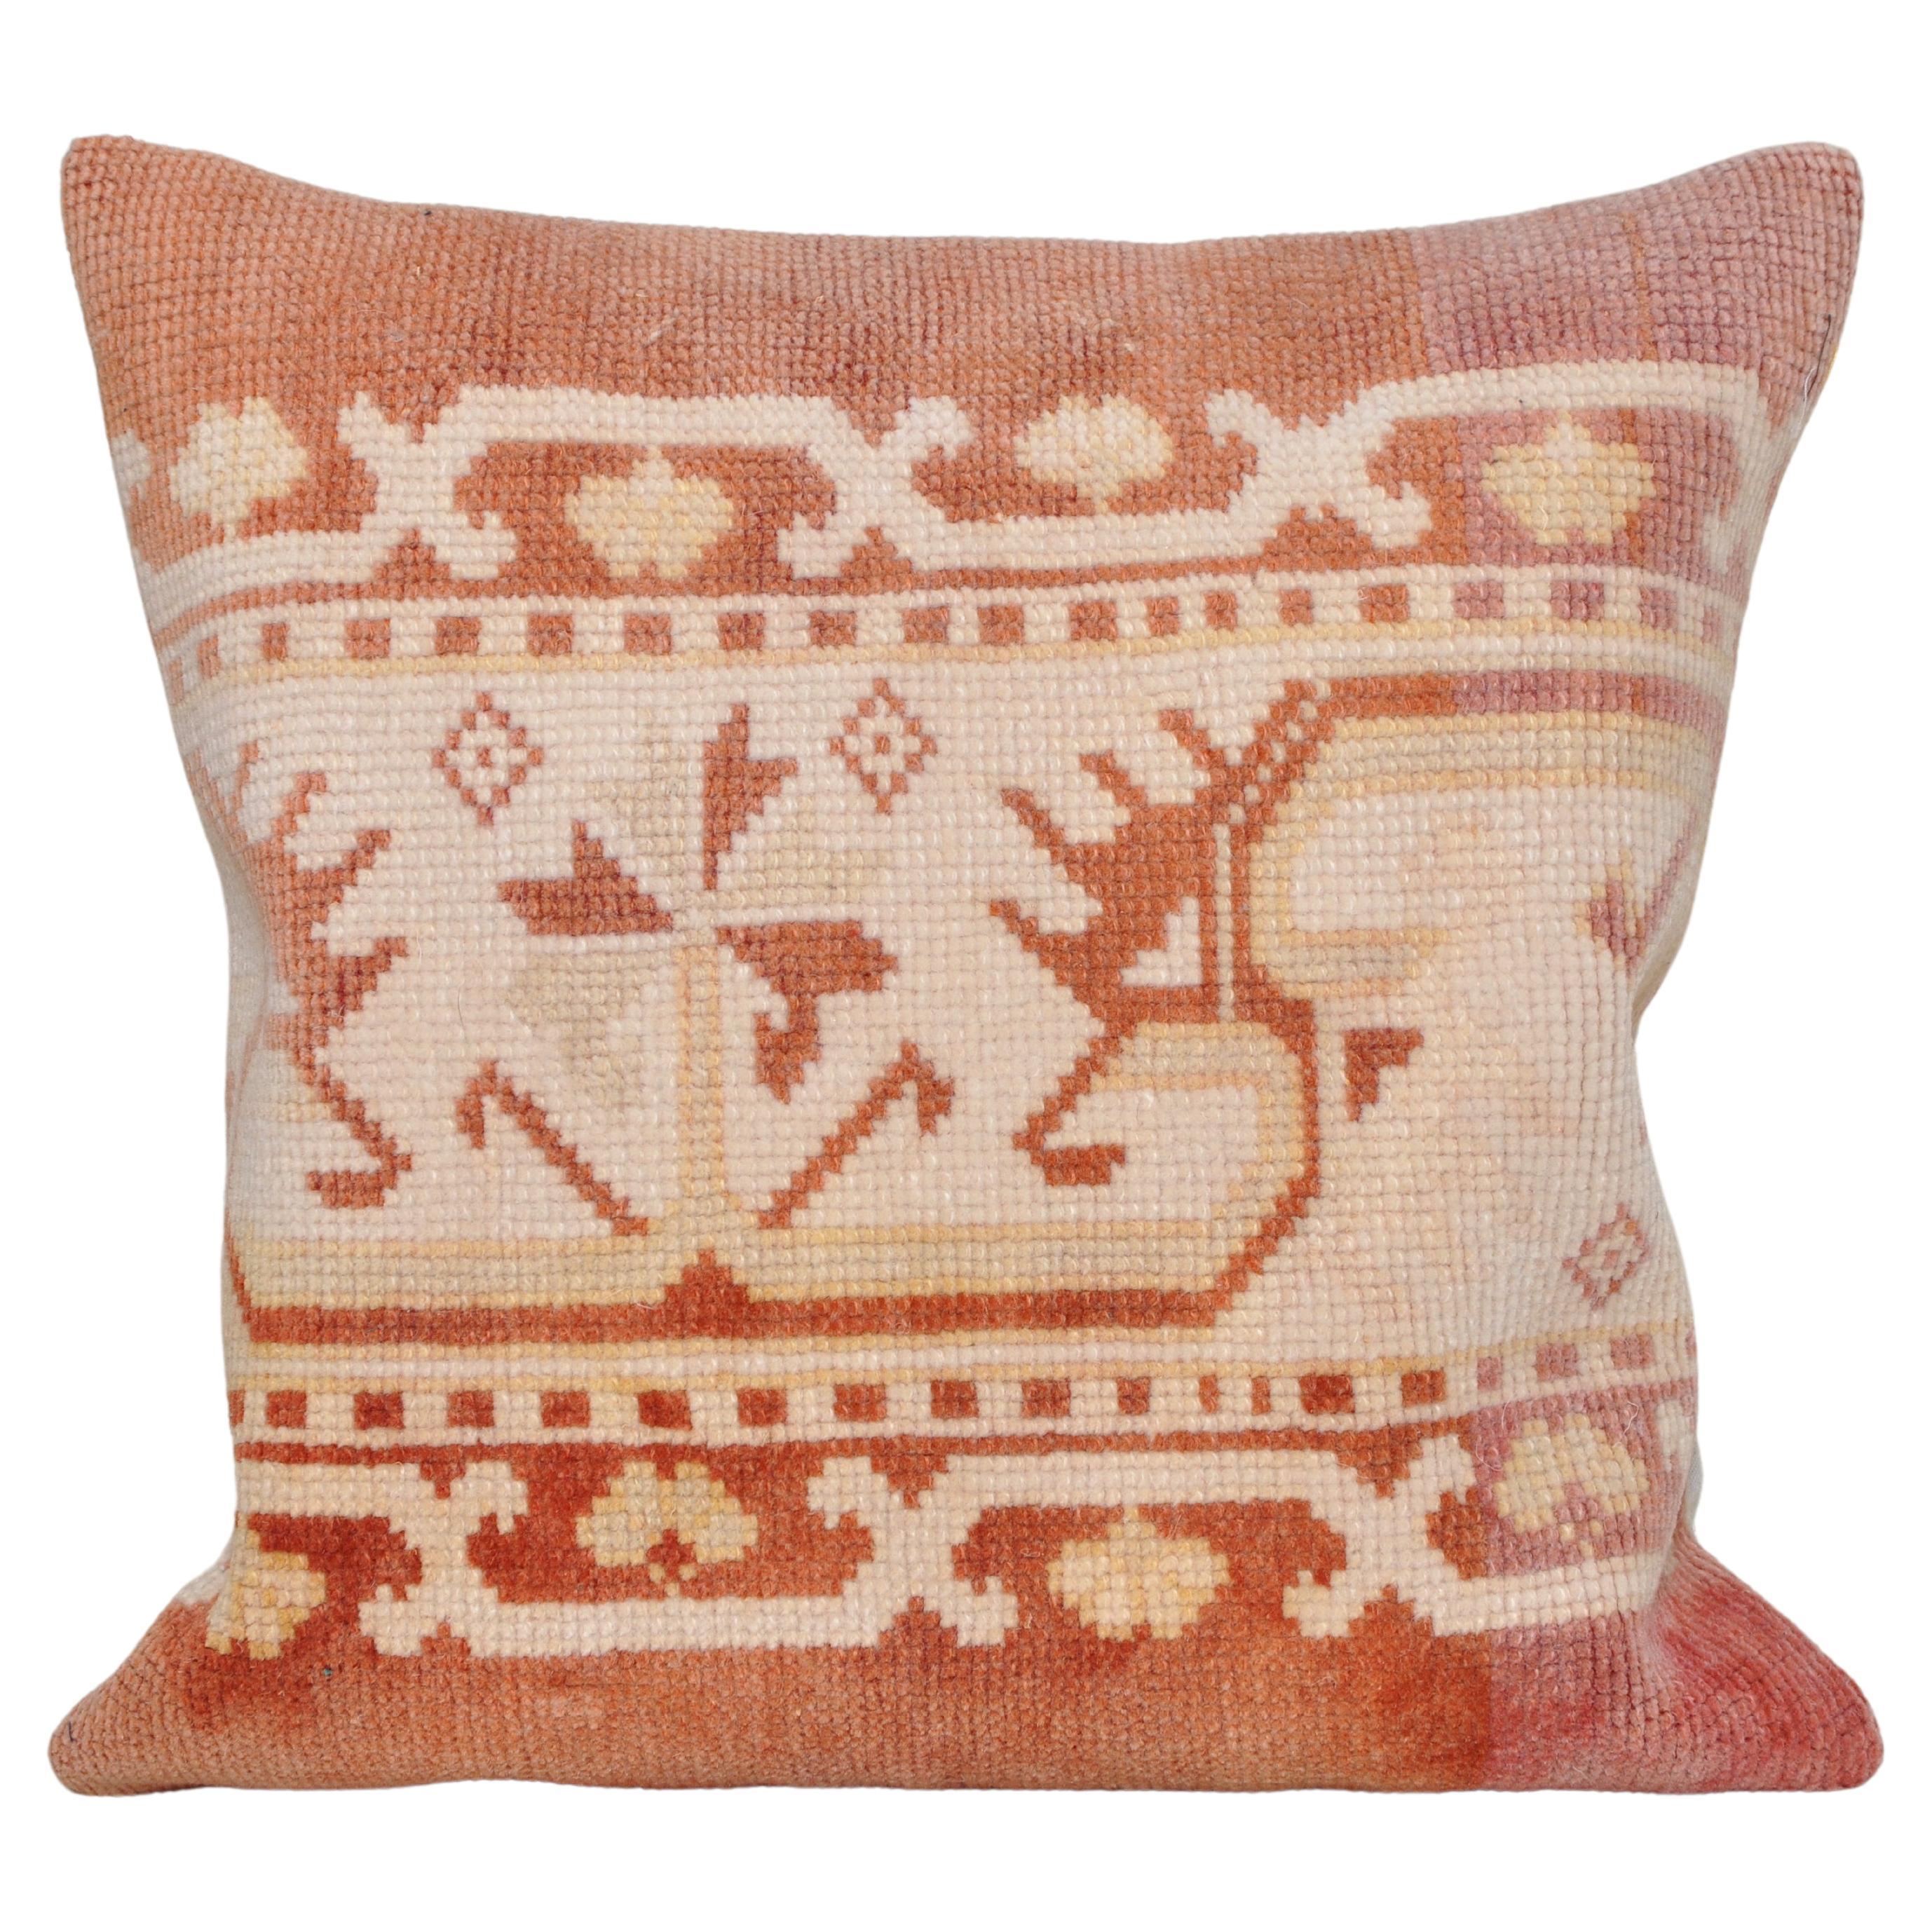 Vintage Kilim Rug Pillow with Irish Linen by Katie Larmour Cushions Carpet